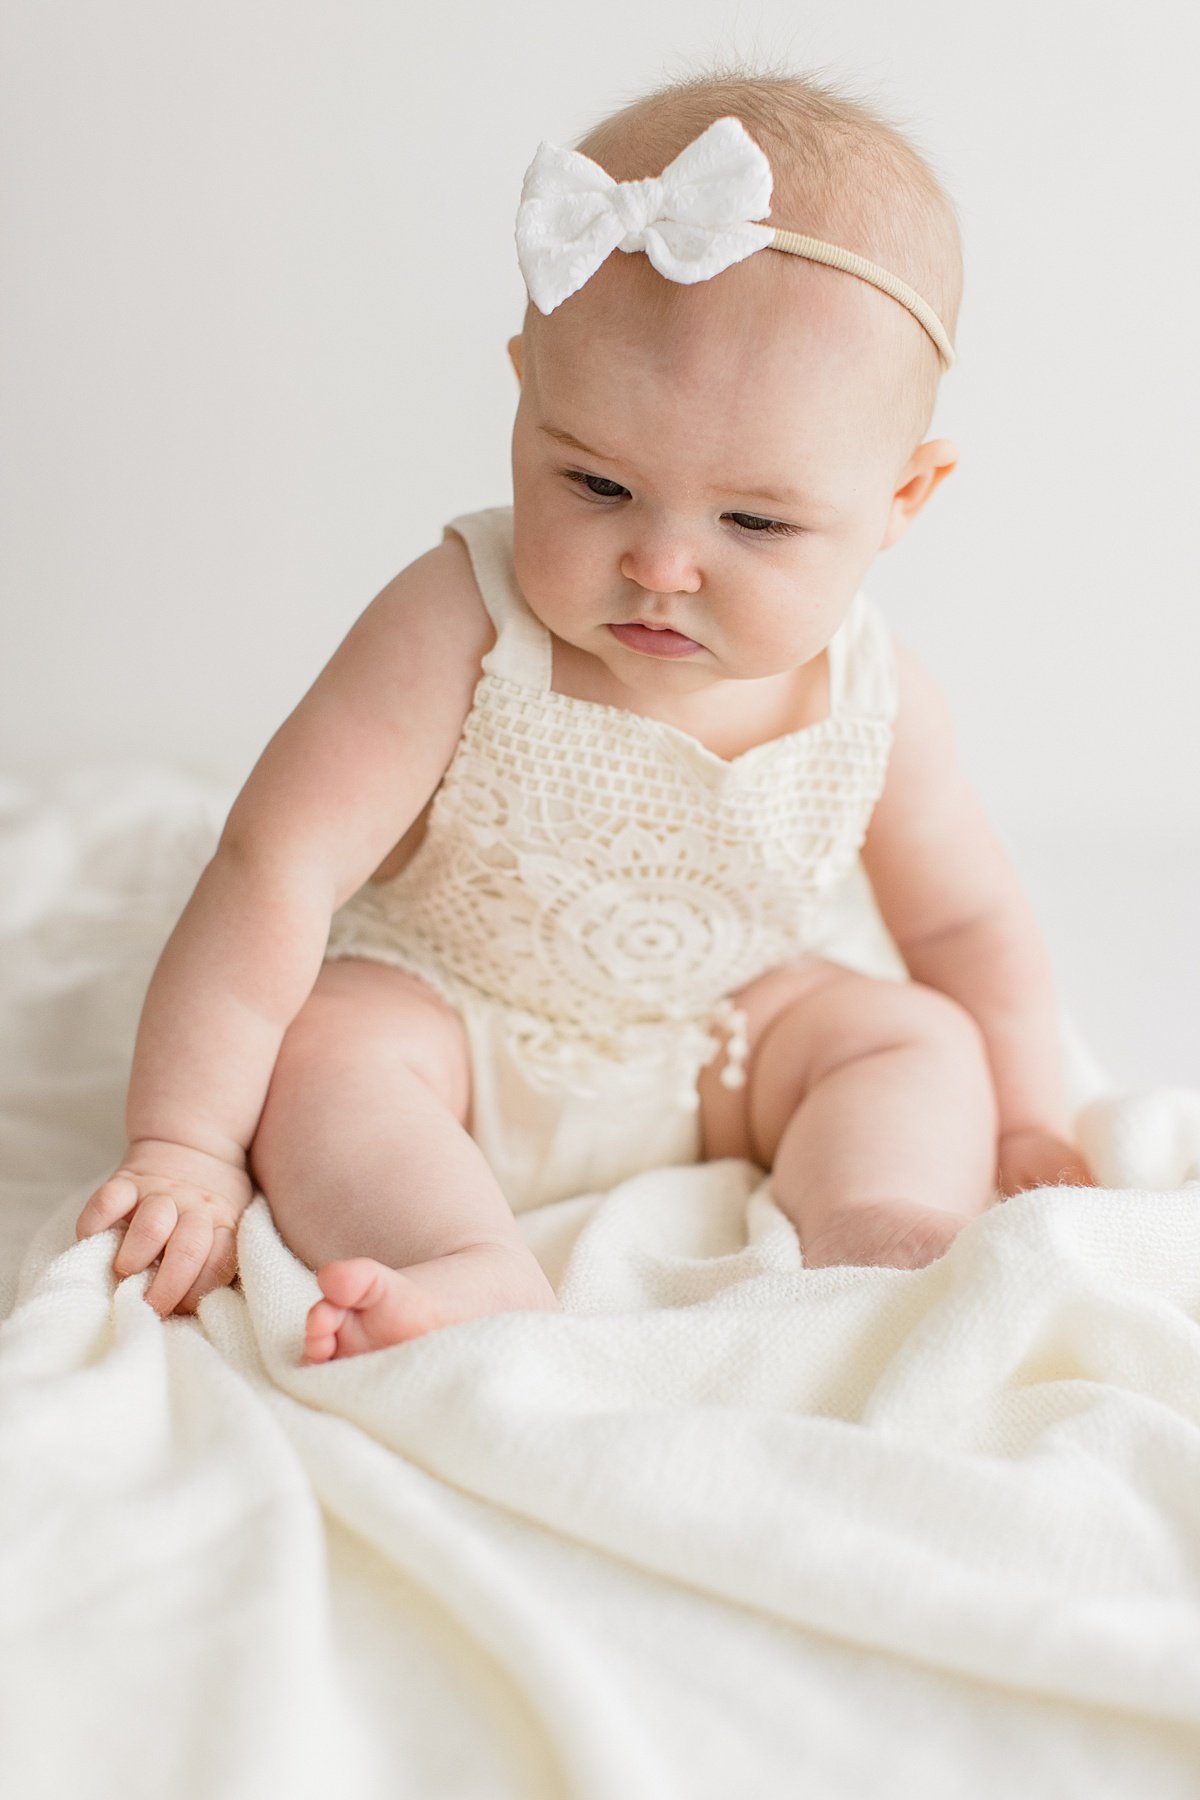 distracted baby during milestone session with Ambre Williams Photography in Newport Beach studio